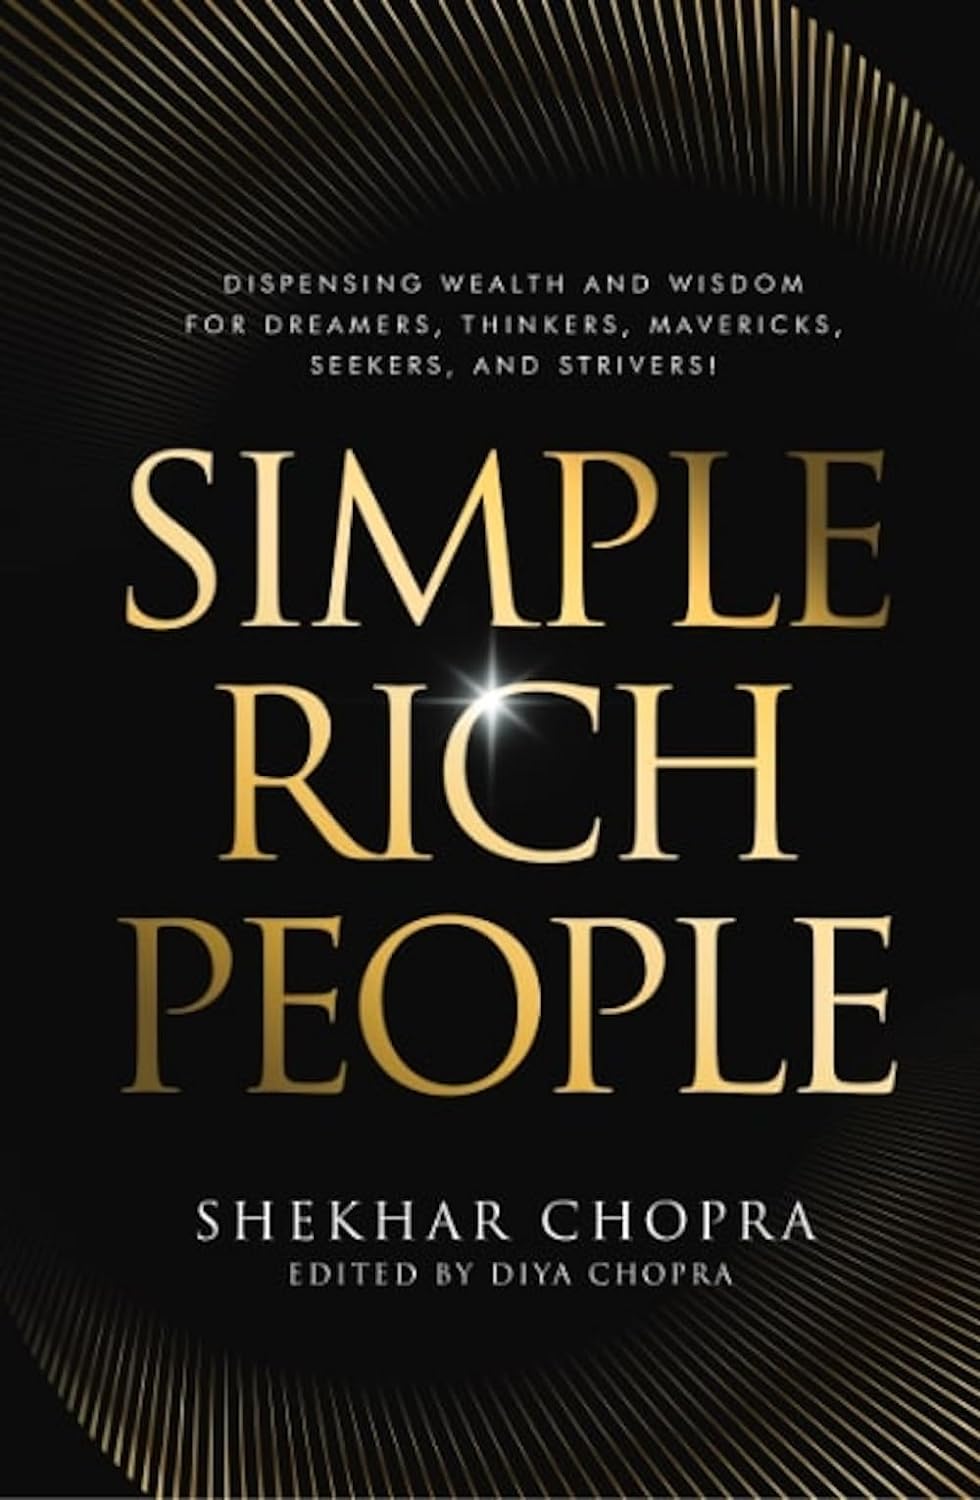 New book "Simple Rich People" by Shekhar Chopra is released, a practical guide for developing financial literacy and building wealth